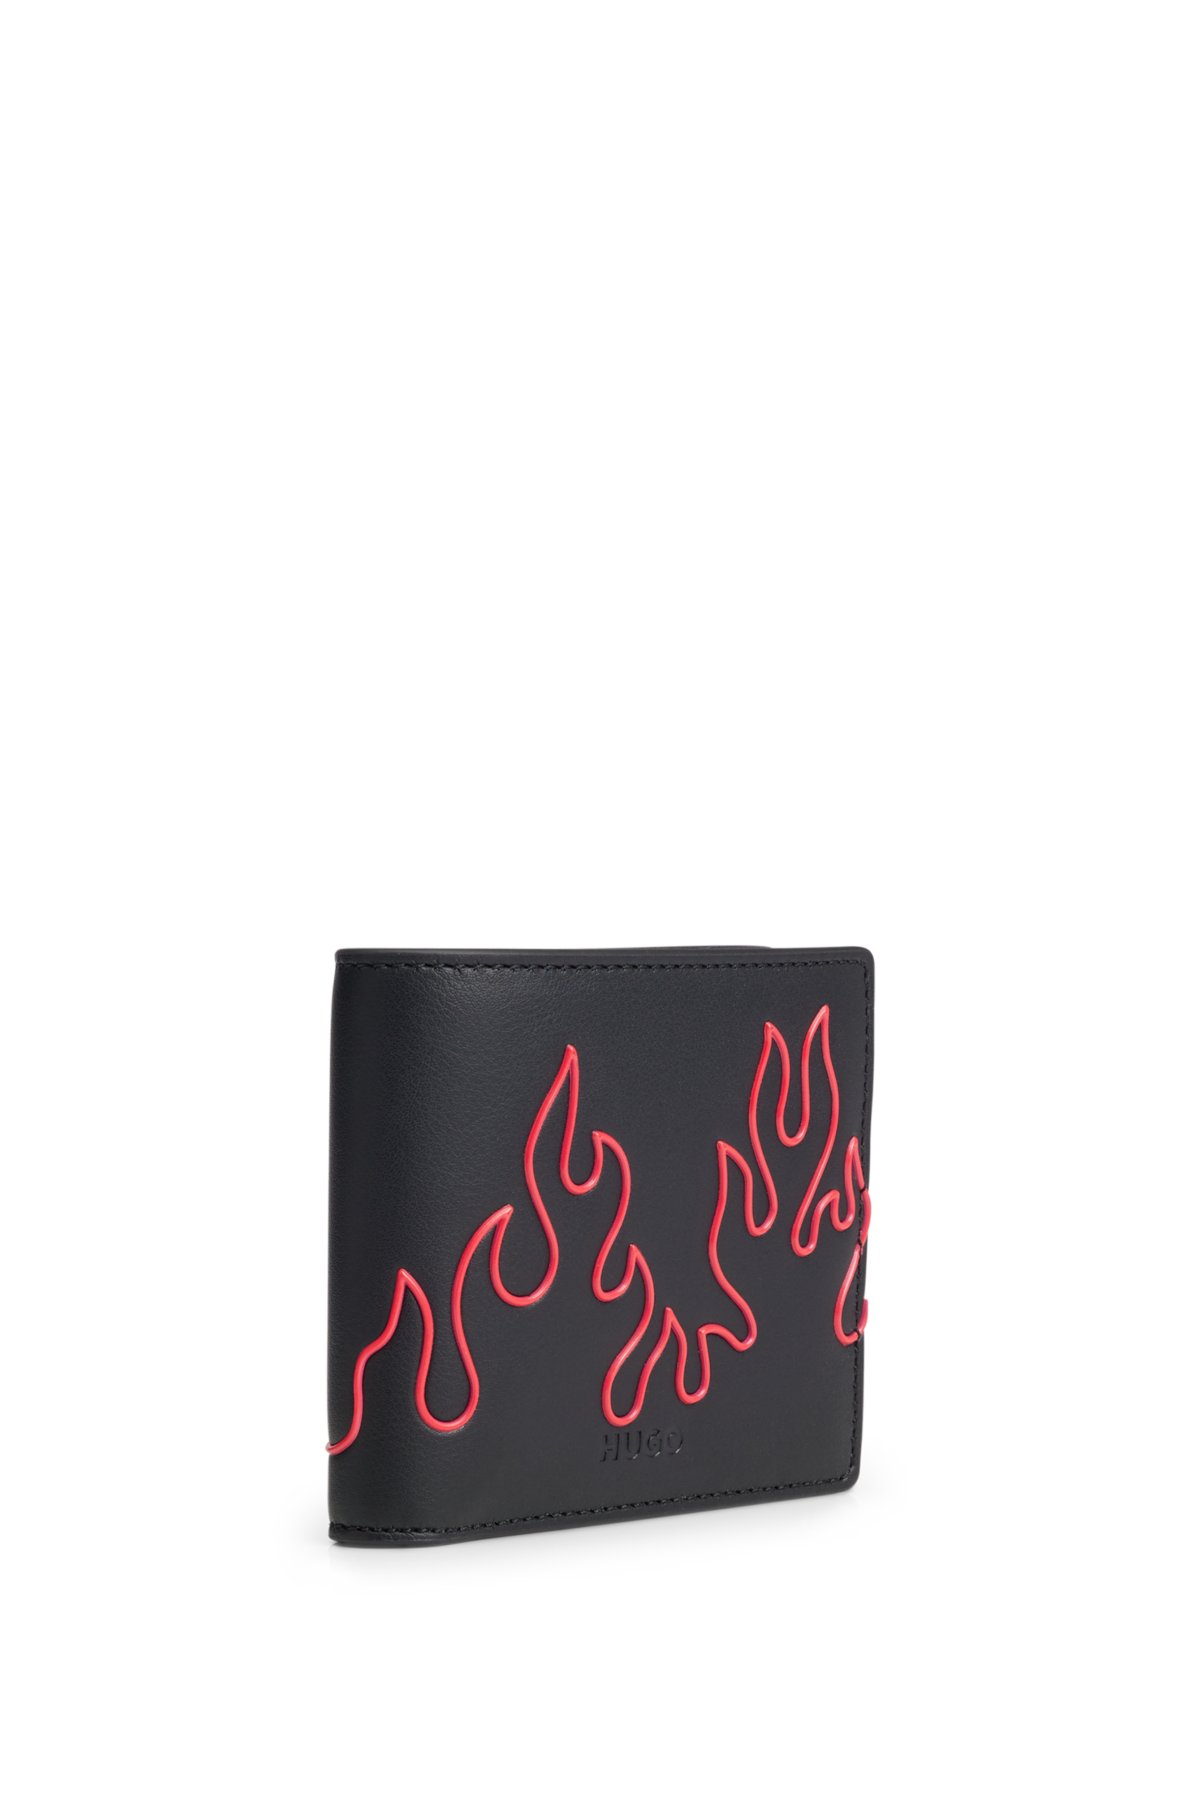 Faux-leather bi-fold wallet with flame artwork, Black